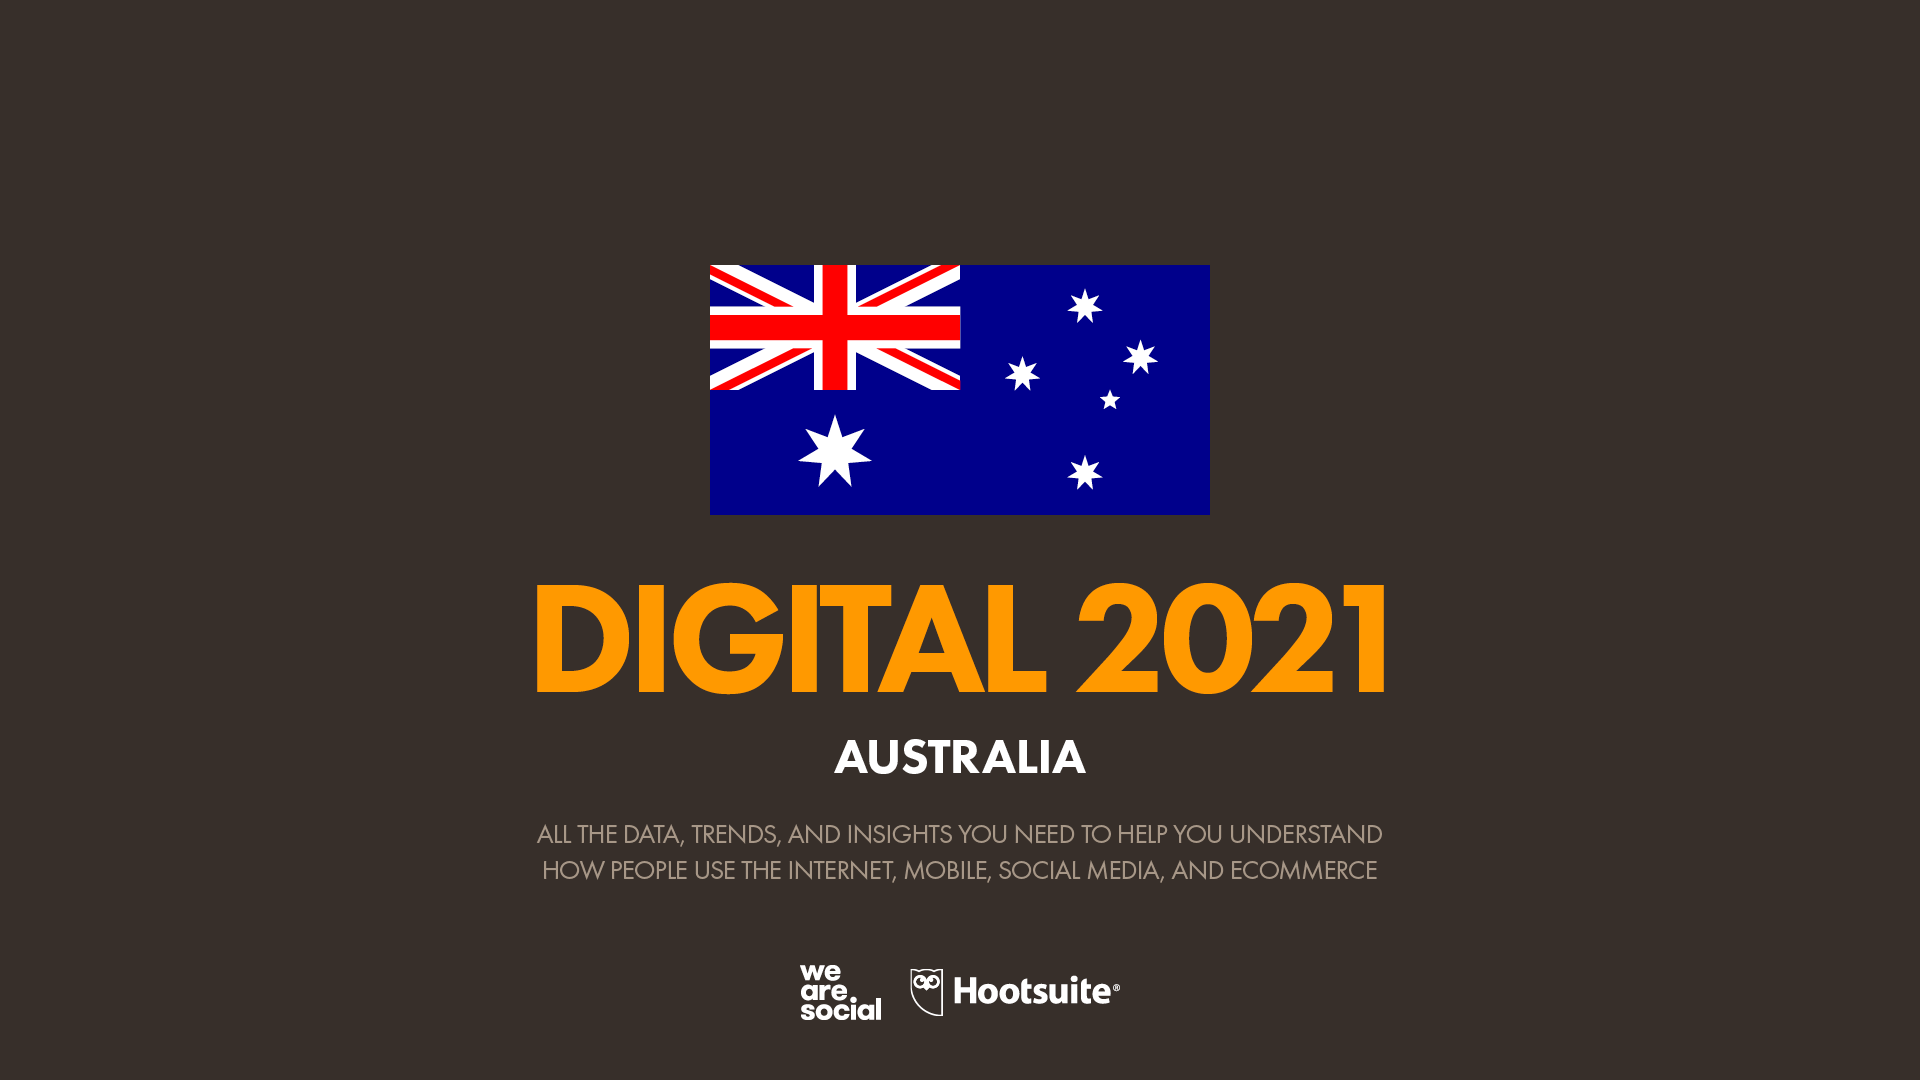 2021 we spend 10% more time online - We Are Australia